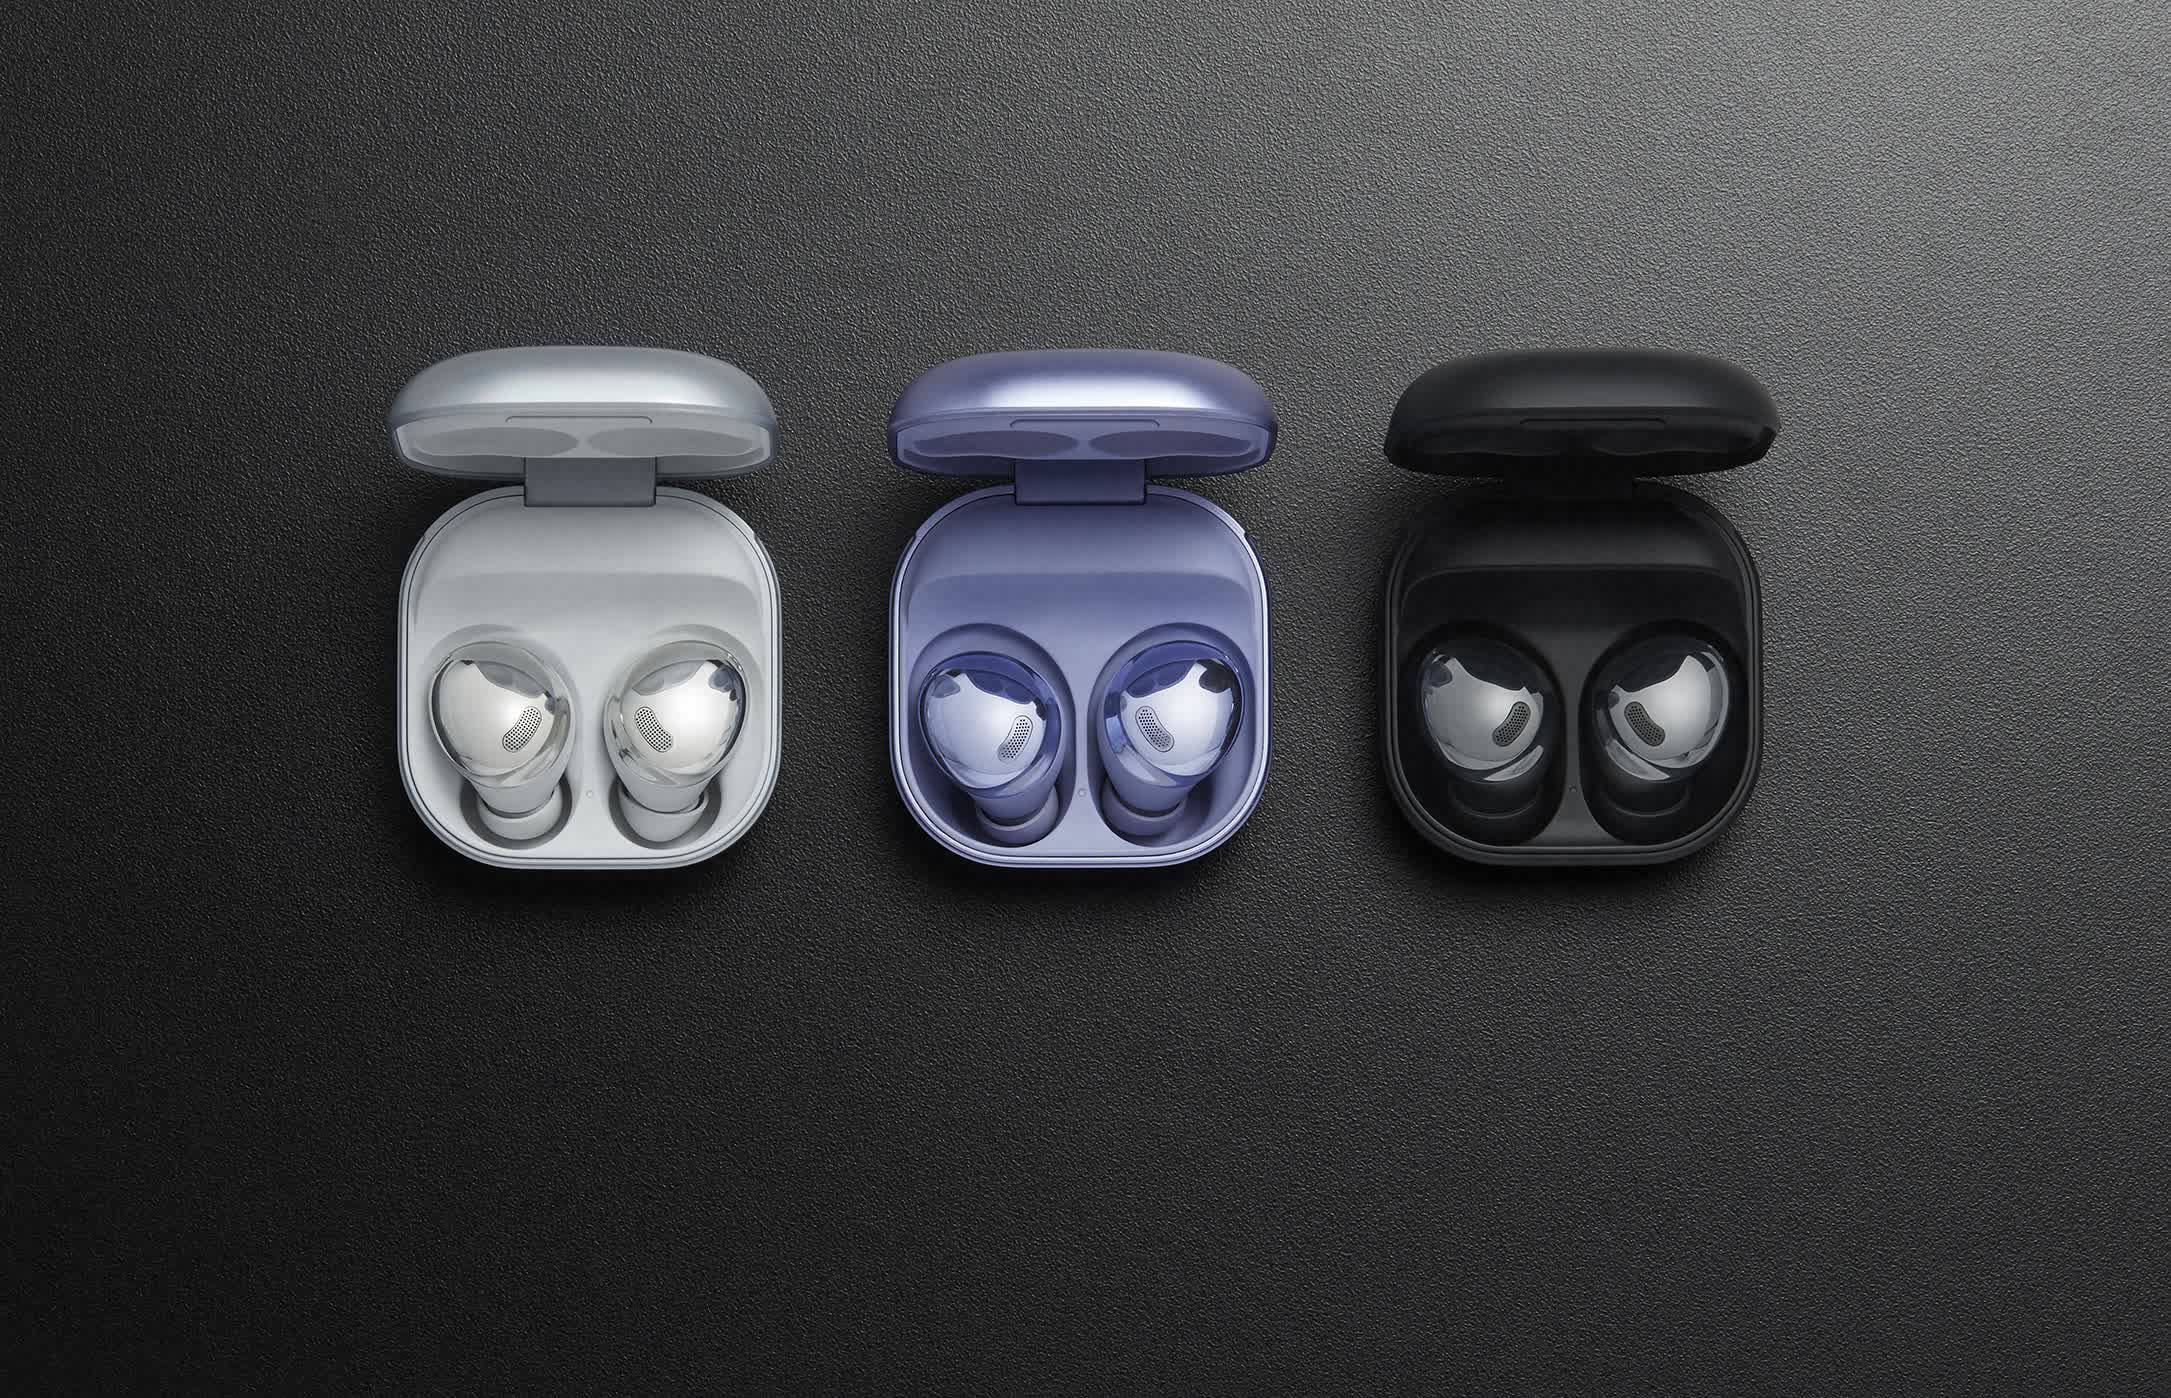 Samsung's Galaxy Buds Pro true wireless earbuds are $50 cheaper than Apple's AirPods Pro